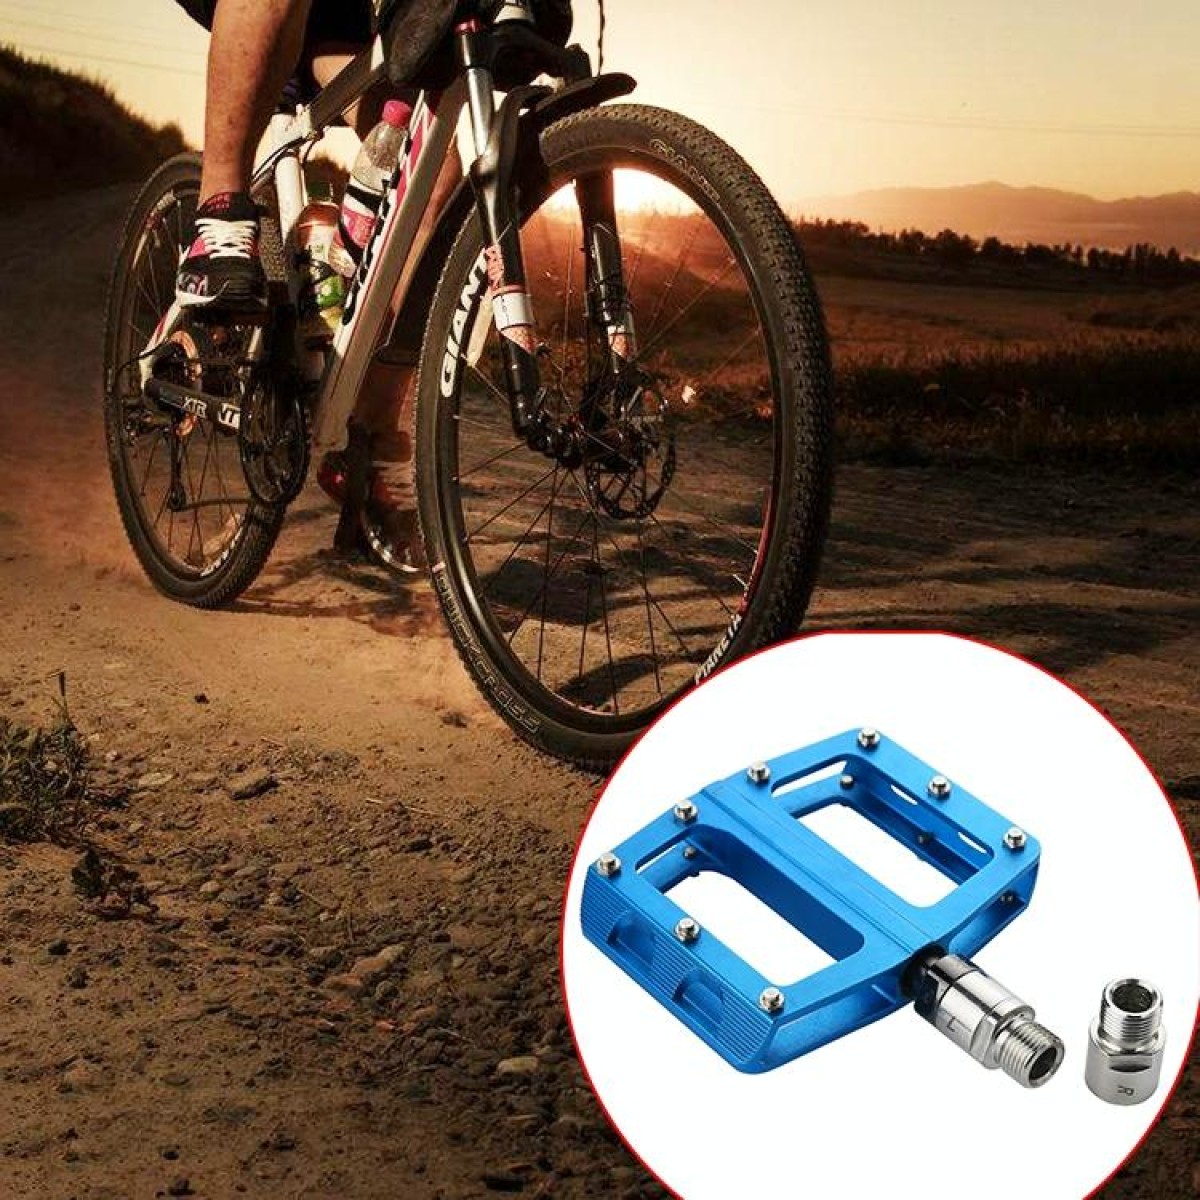 QL1 One Pair Steel Bike Pedal Spacer Extenders Bicycle Pedal Spacers for 9/16 inch Threaded Pedals